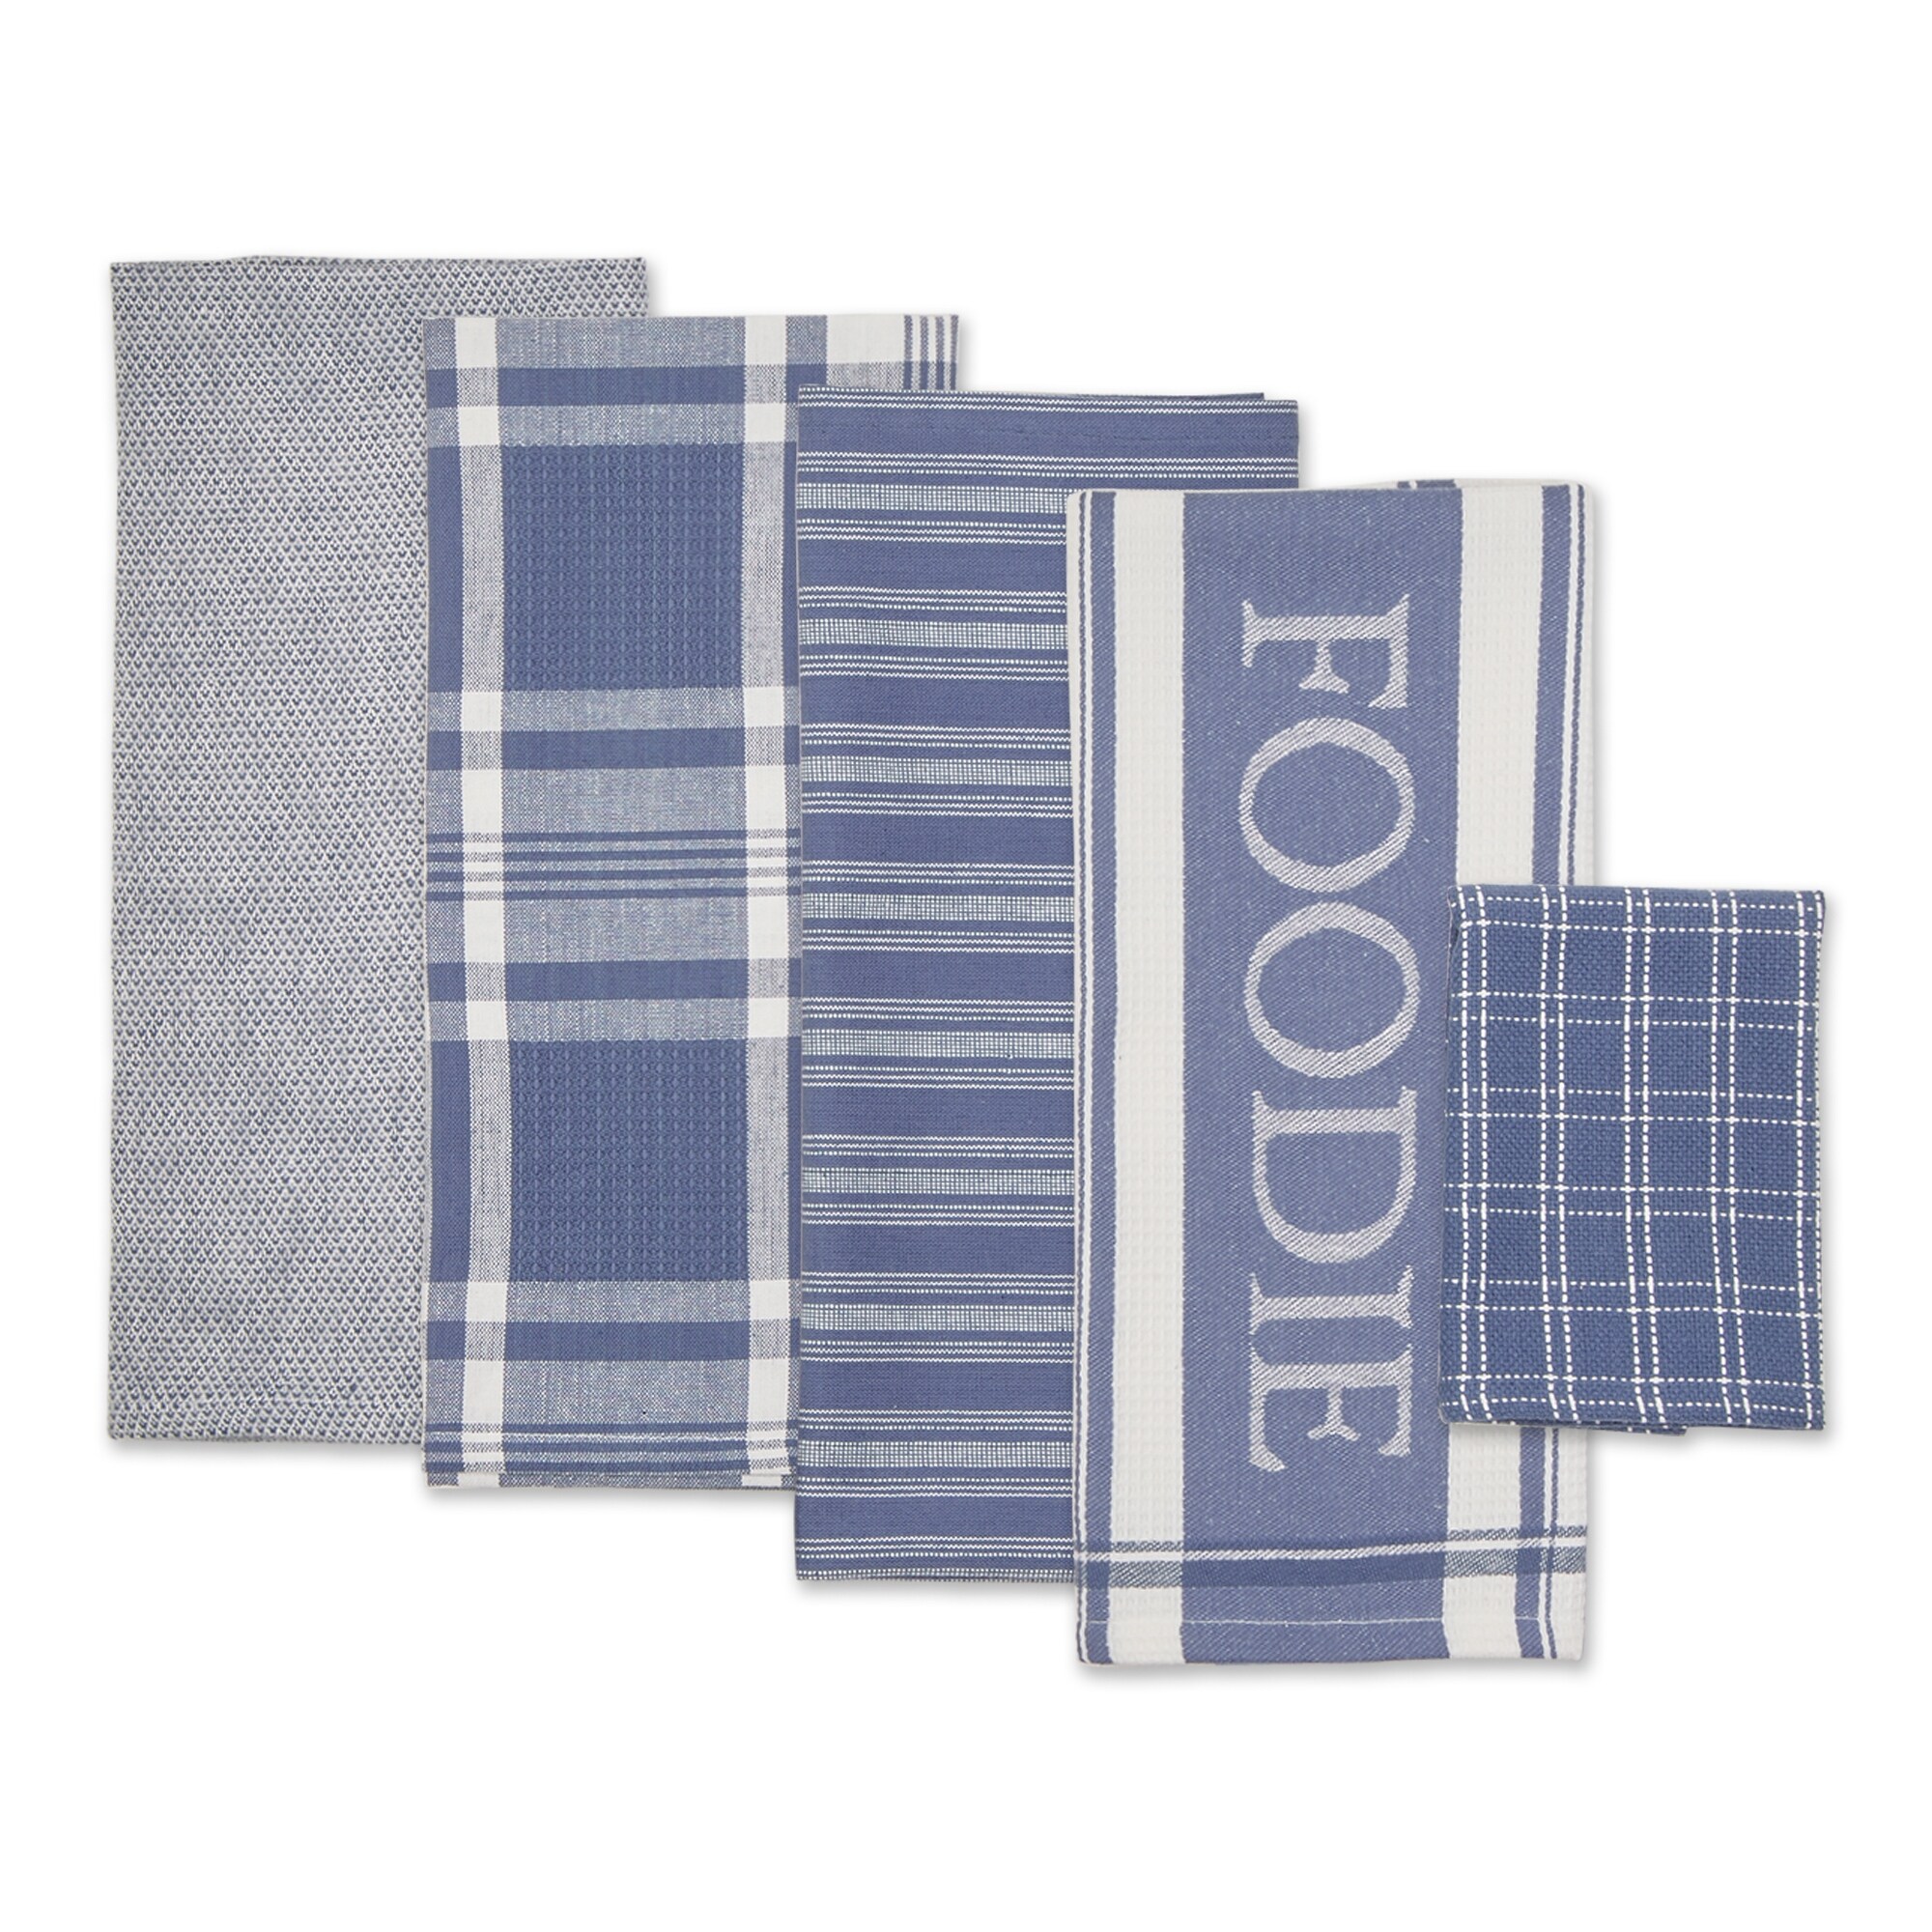 https://ak1.ostkcdn.com/images/products/is/images/direct/502852ea0a75a13b733ea9f5f4f0cd7a12114f72/DII-Foodie-Dishtowel-And-Dishcloth-5-Piece.jpg